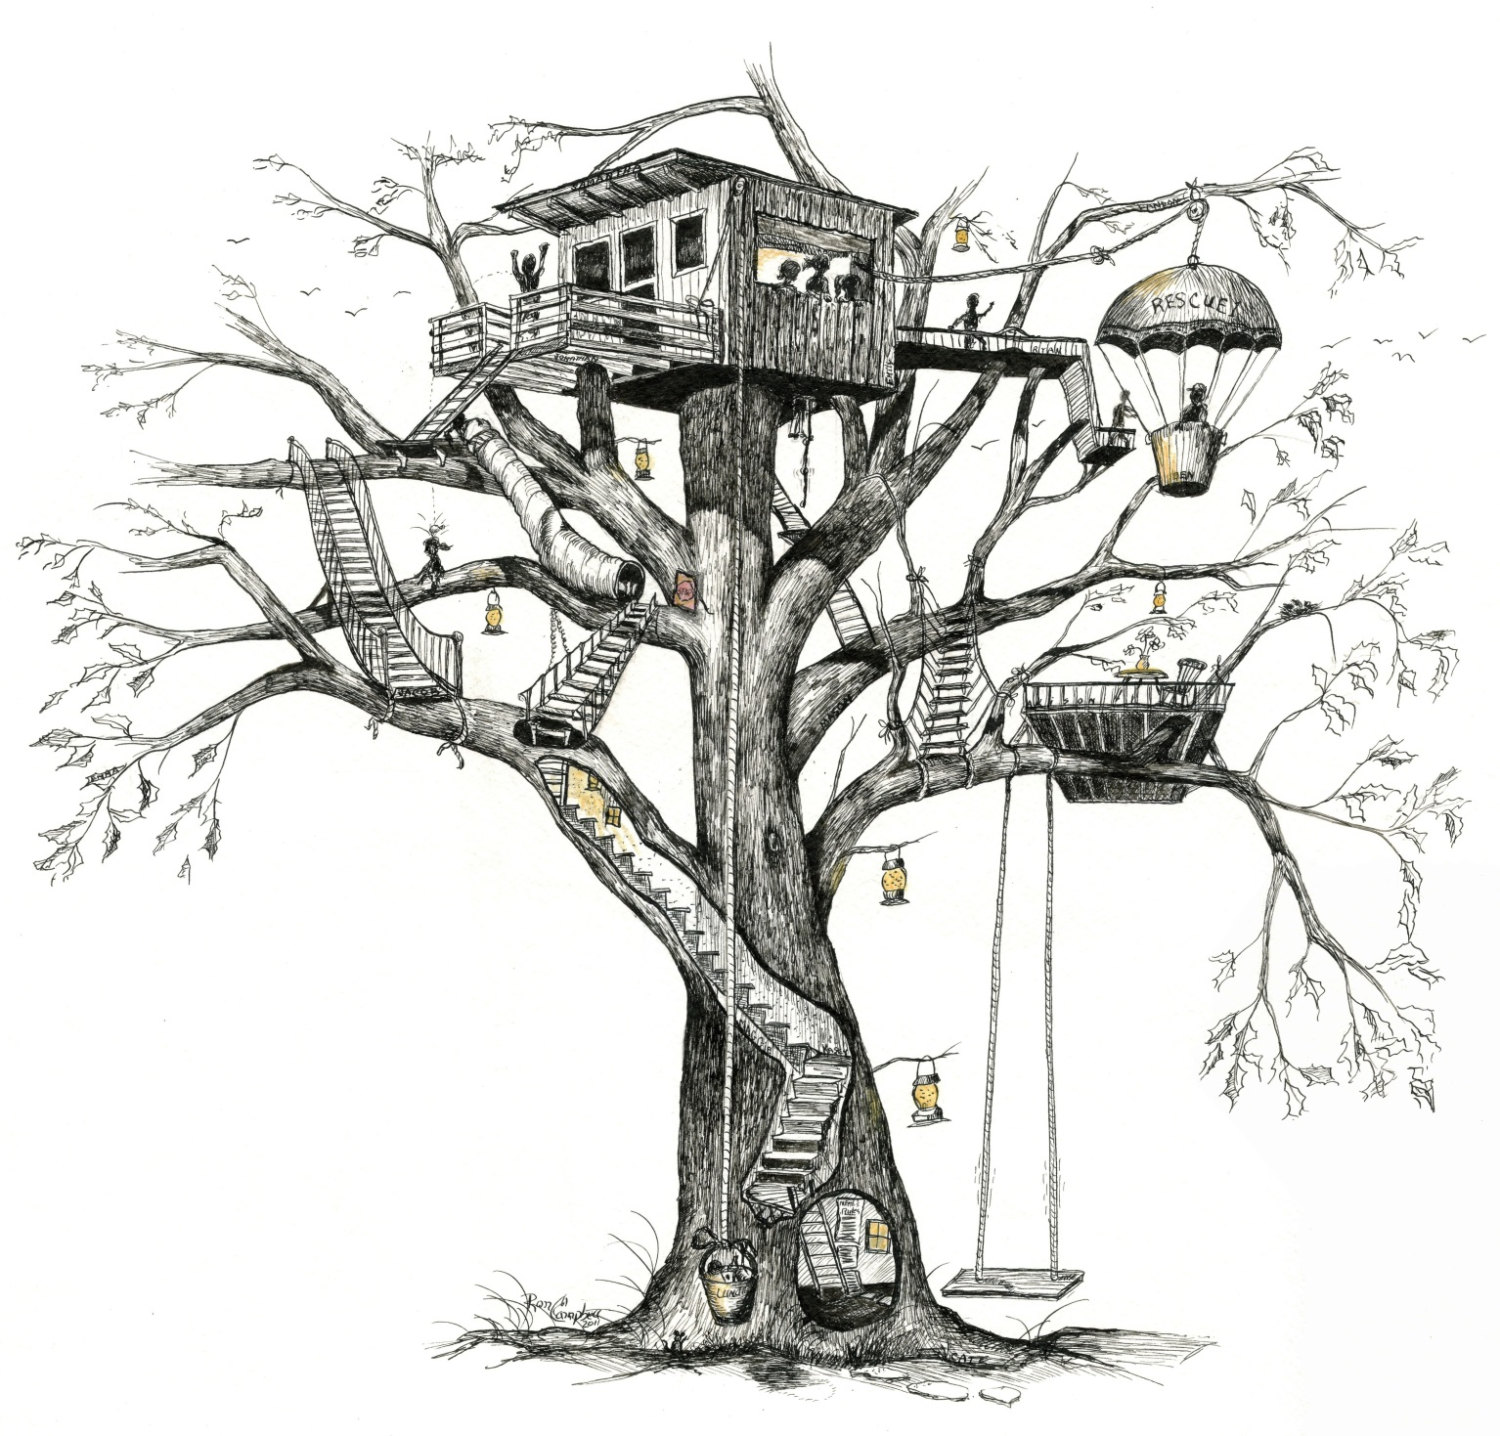 Treehouse tree house whimsy fireflies Pen & Ink and